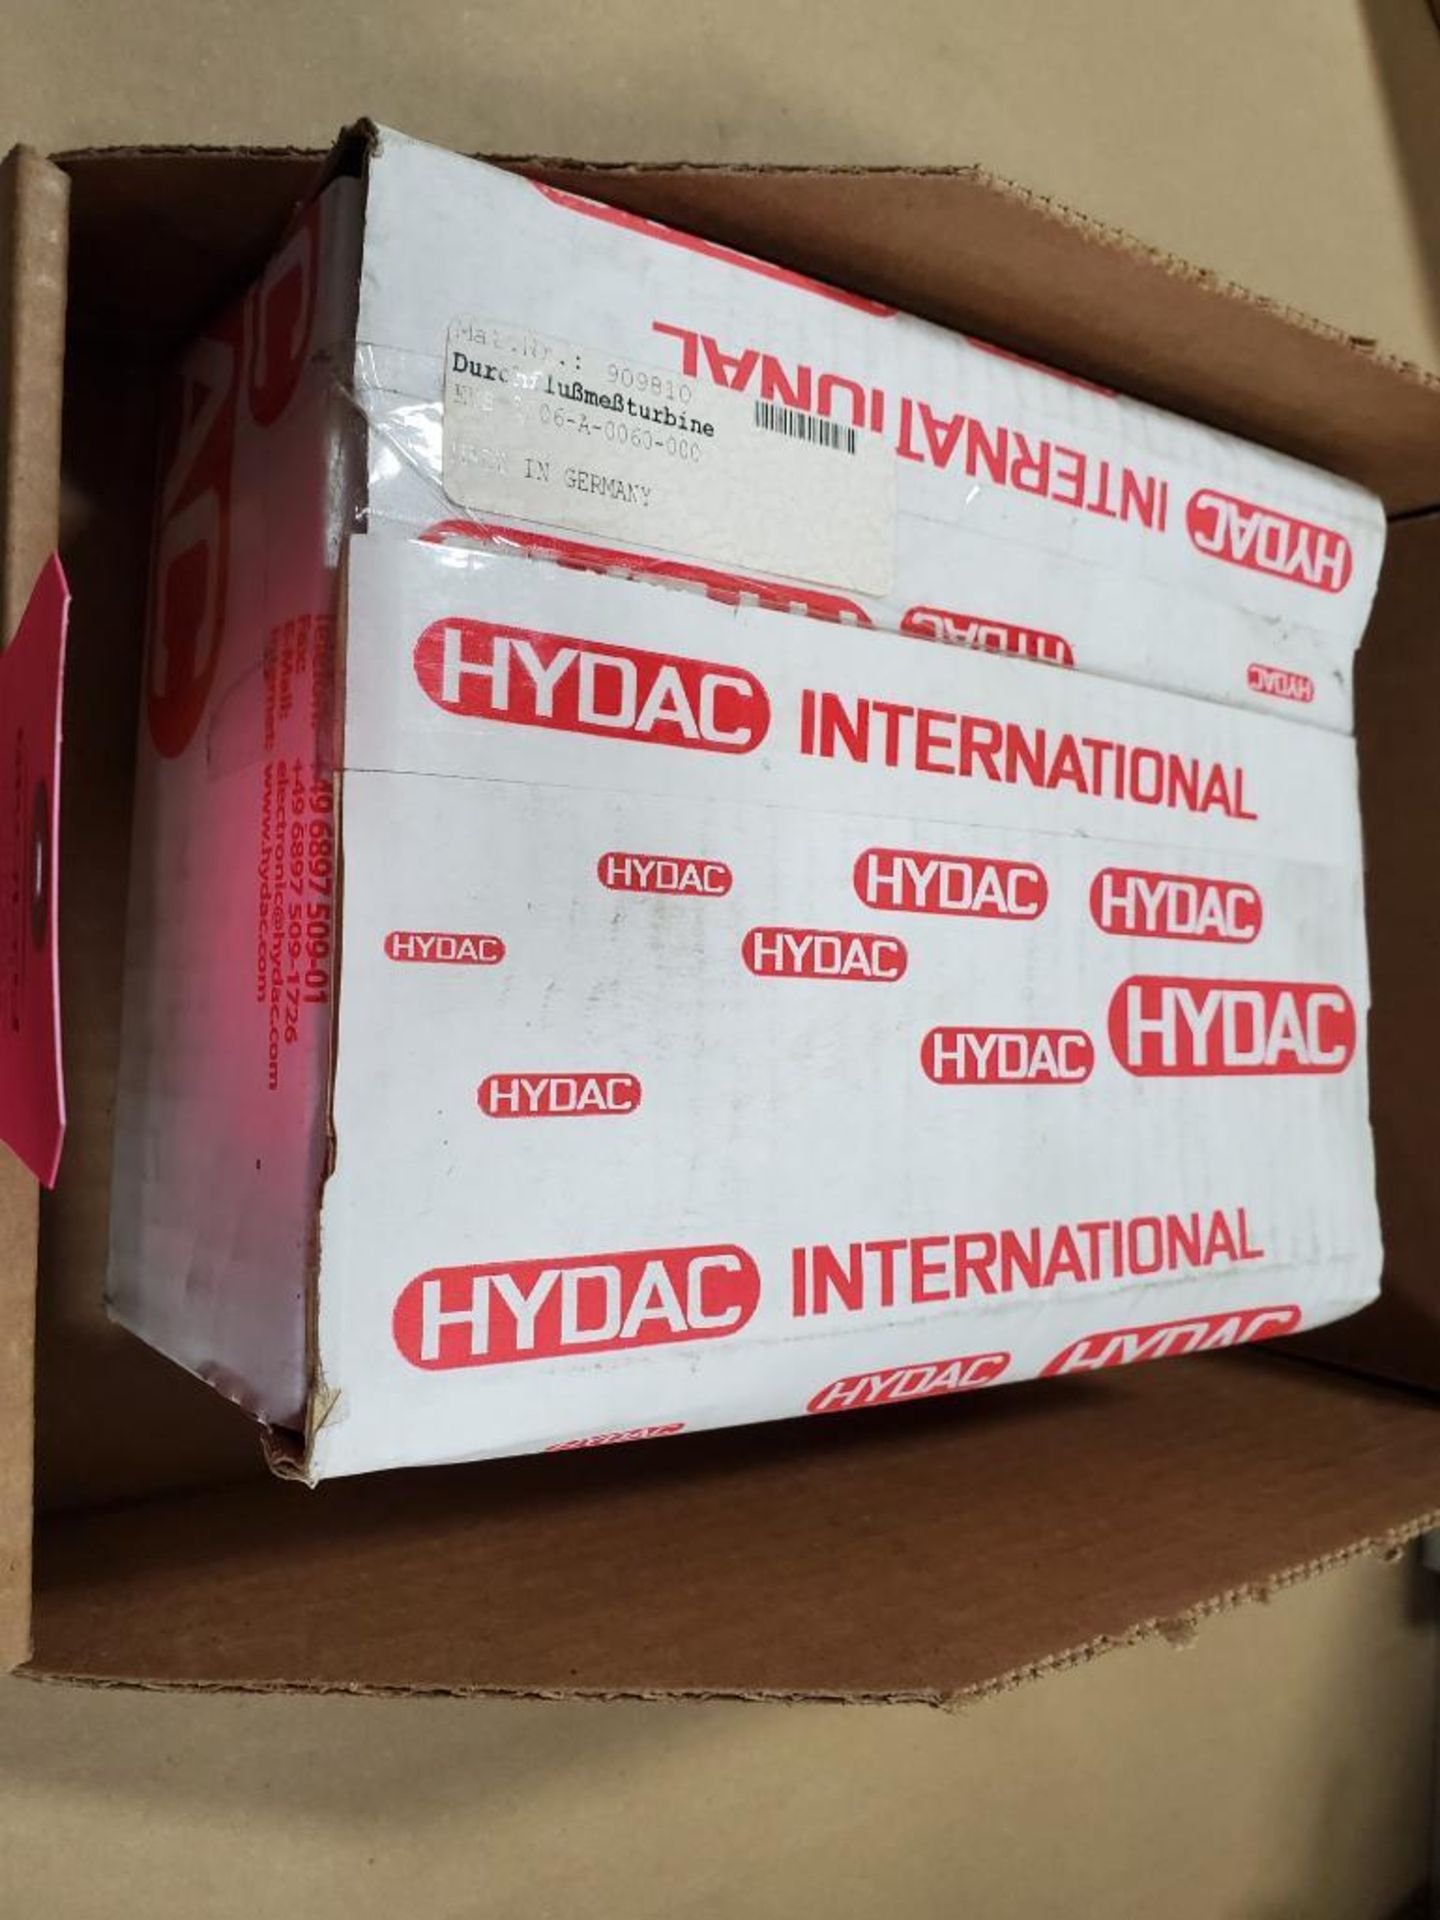 Hydac EVS 3106-A-0060-000 flow rate transmitter. New in box.